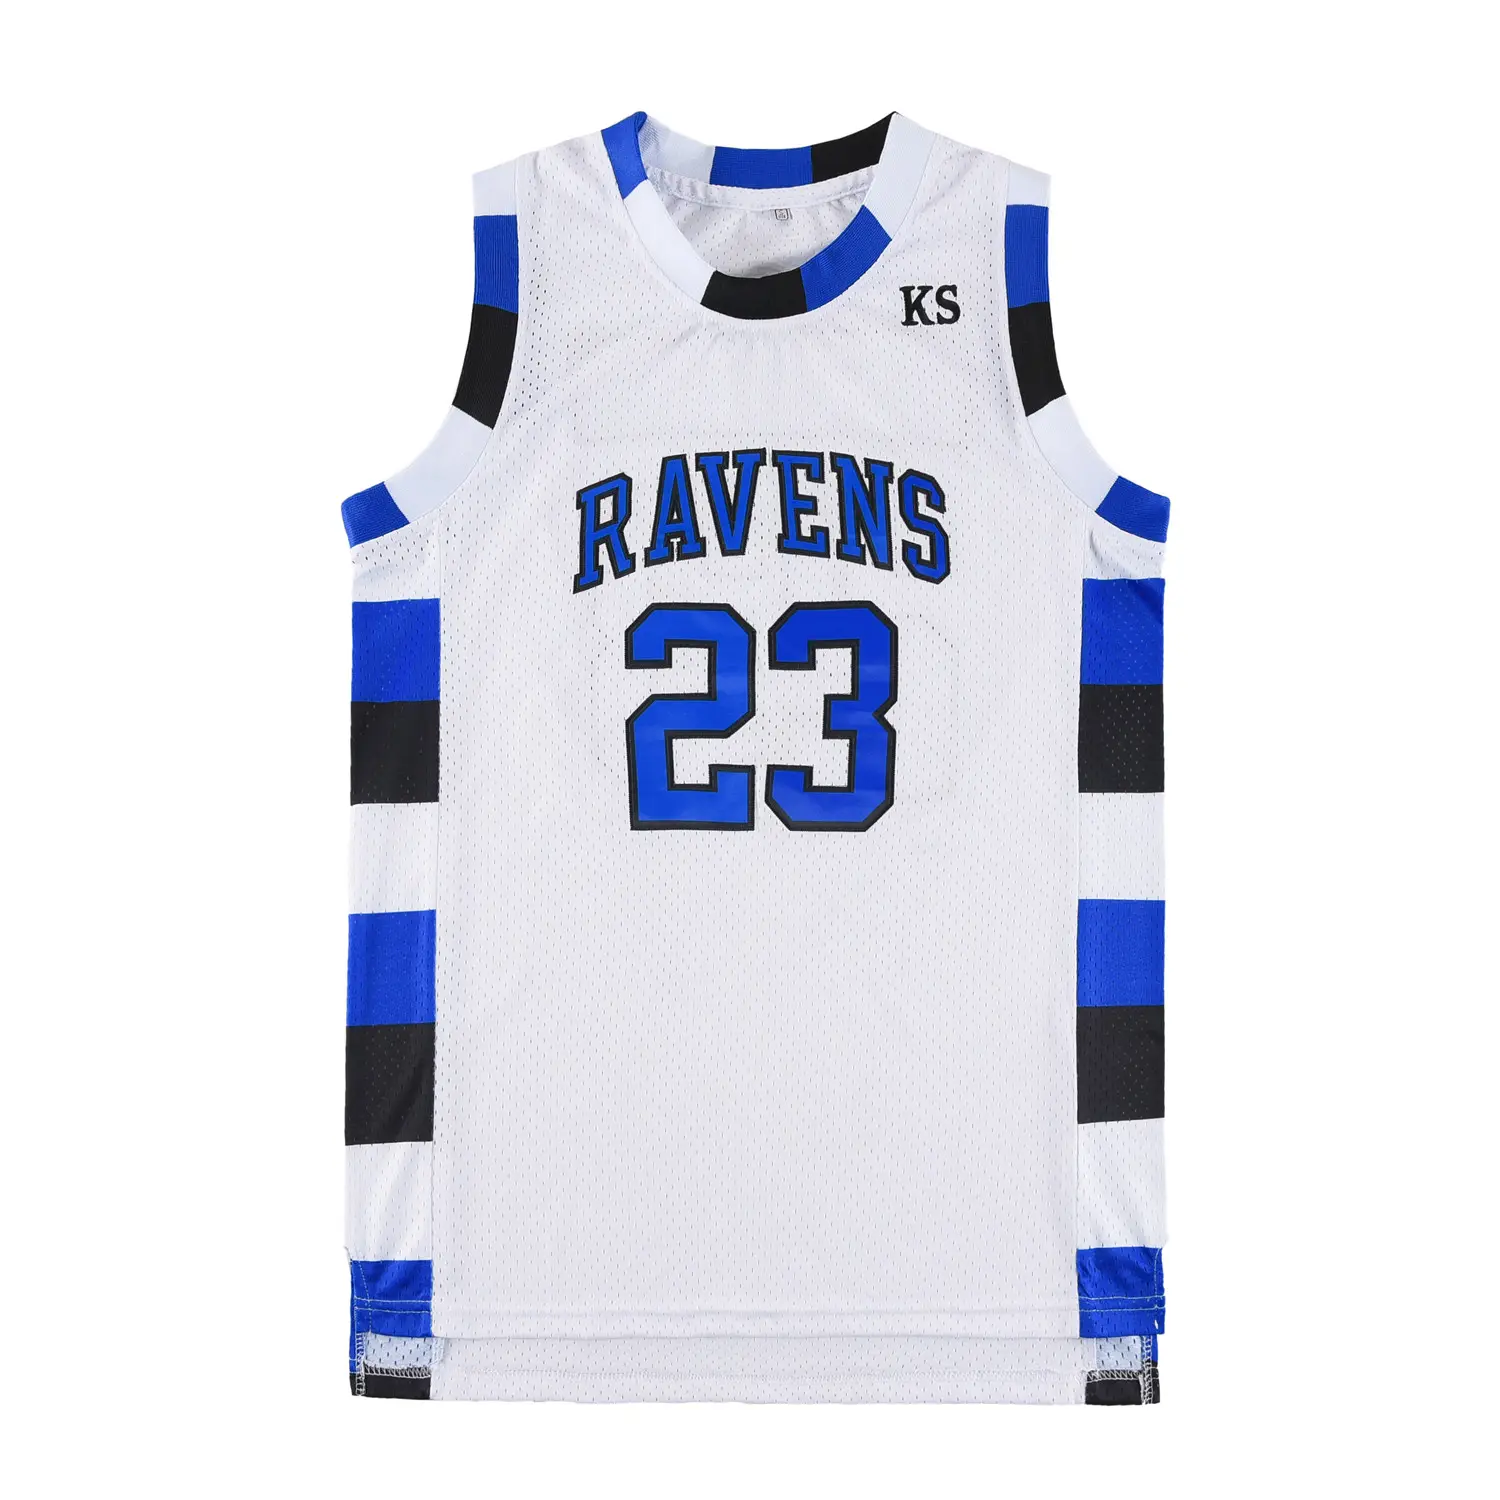 Customize Sublimation Polyester Mesh Fabric Breathable Quick Dry Sport Basketball Jersey